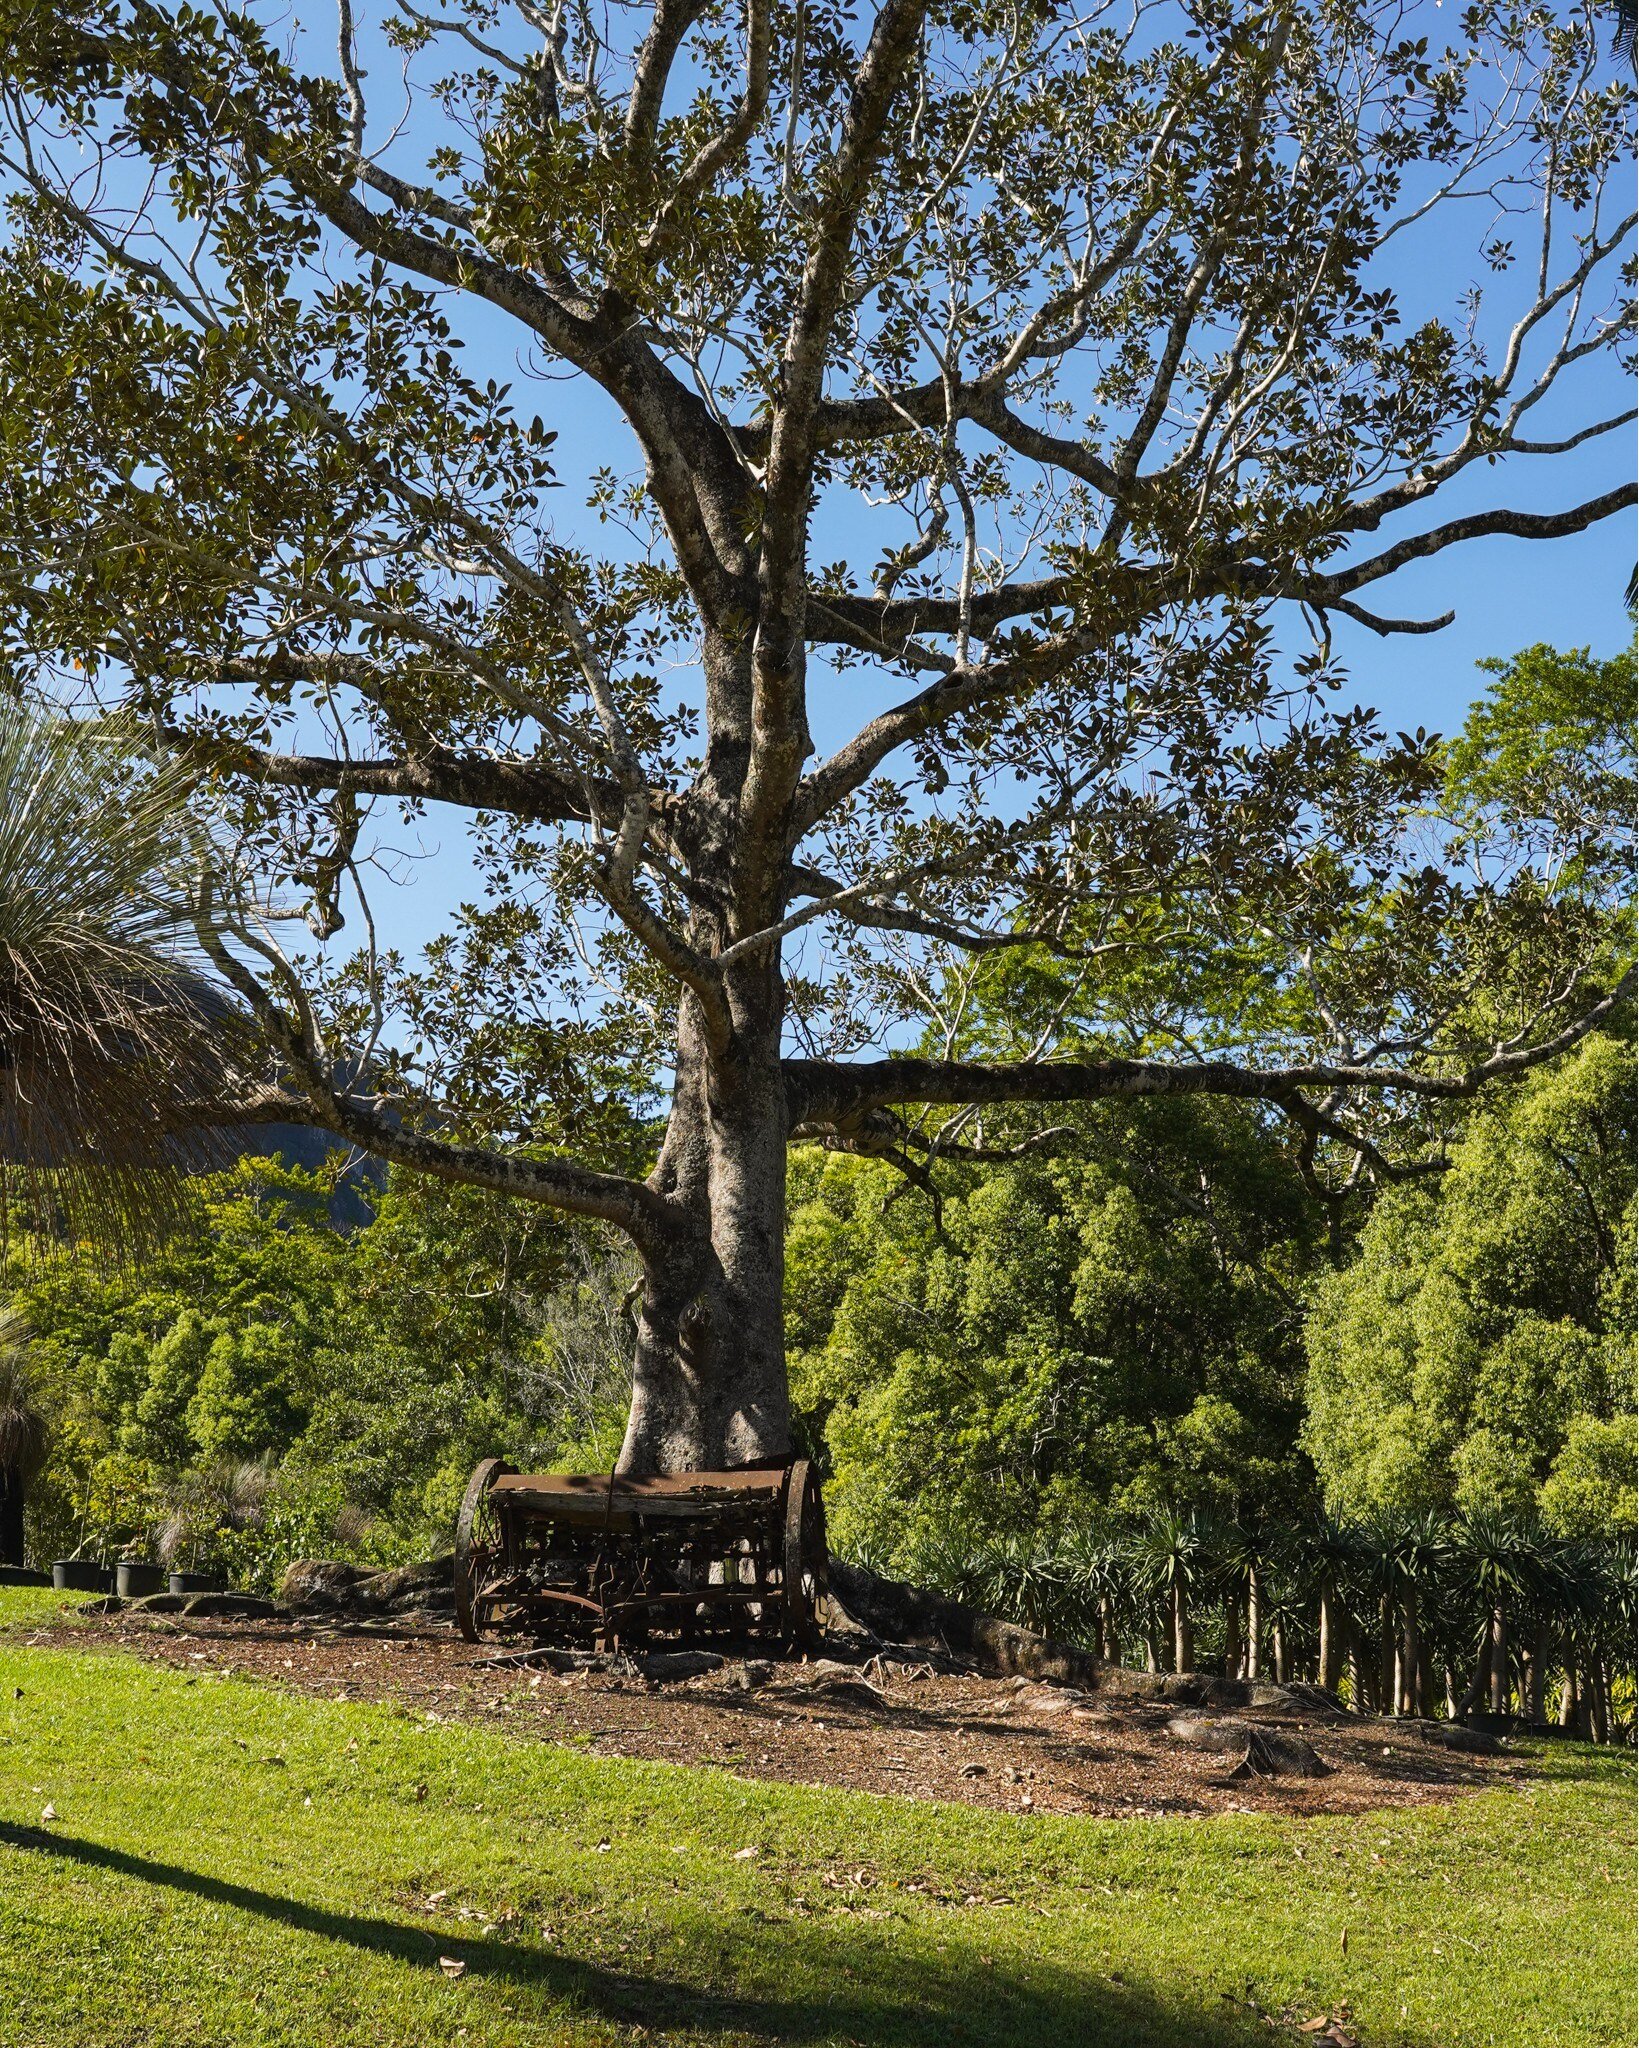 Rustic charm meets natural beauty at our tree farm, where dragon trees stand tall behind a weathered wagon at Heritage Acres 🌳 

Contact us to learn about our Dragon Trees.

#heritageacres #treefarm #maturetreefarm #exotictreefarm #currumbinvalley #